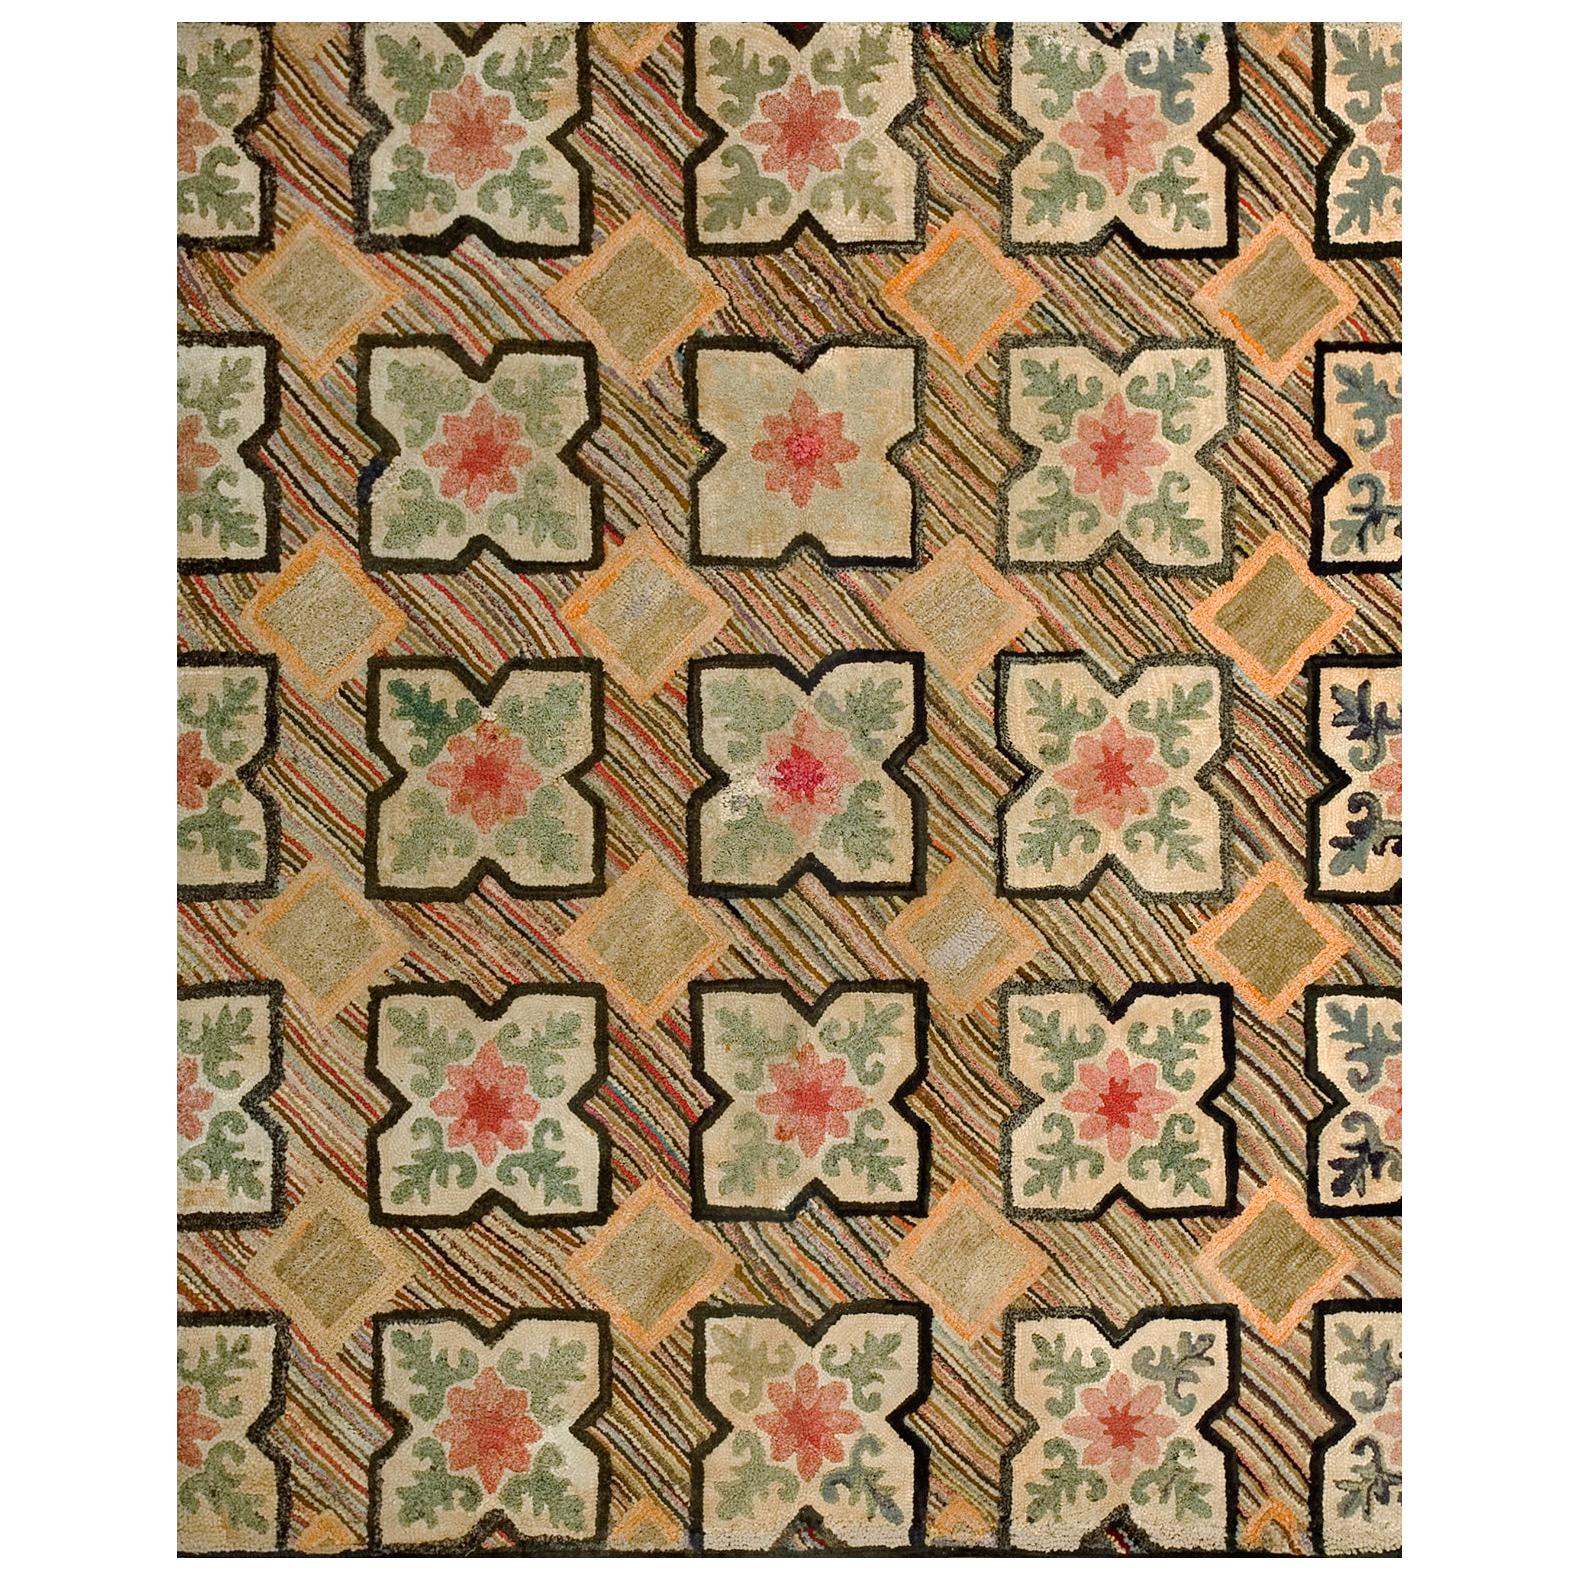 19th Century American Hooked Rug ( 4'6" x 5'6" - 137 x 168 ) For Sale